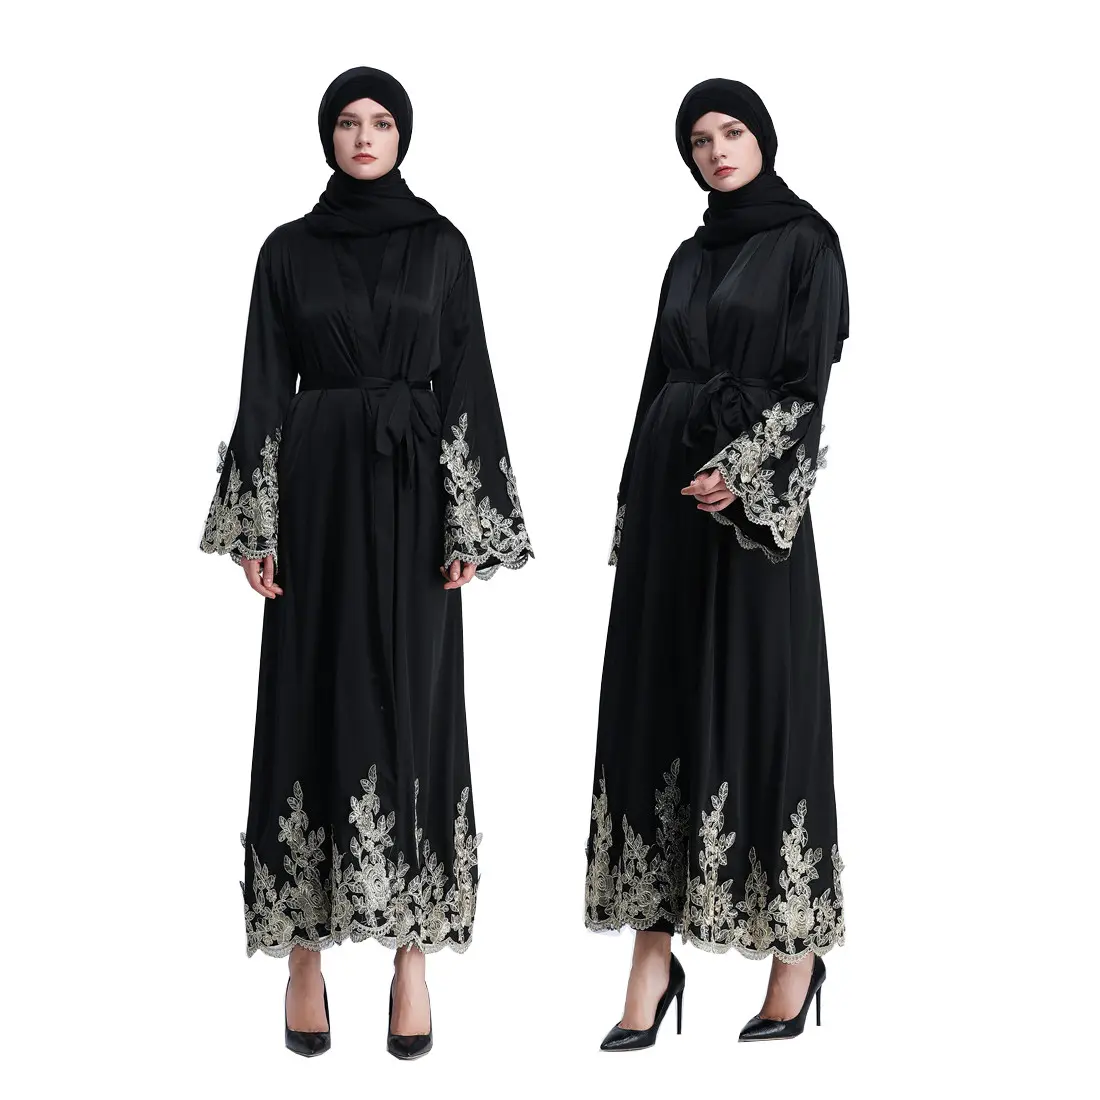 Traditional african dress Special Muslin embroidered lace cardigan robeabaya Dress